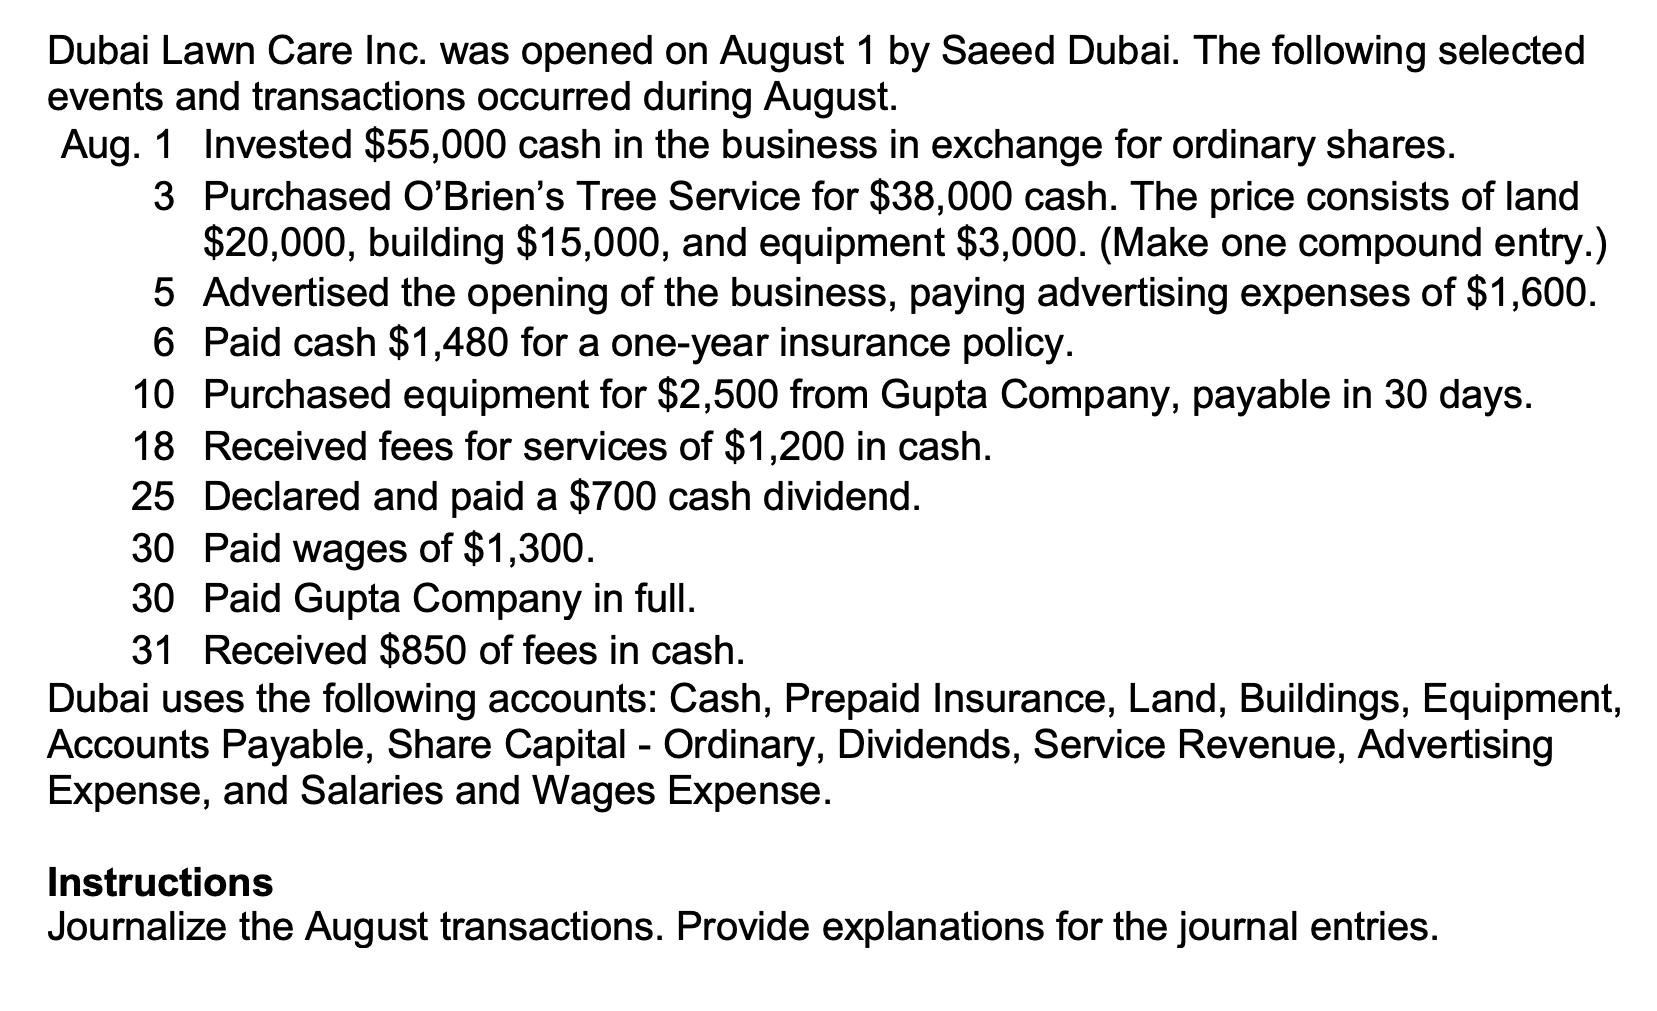 Dubai Lawn Care Inc. was opened on August 1 by Saeed Dubai. The following selected events and transactions occurred during Au